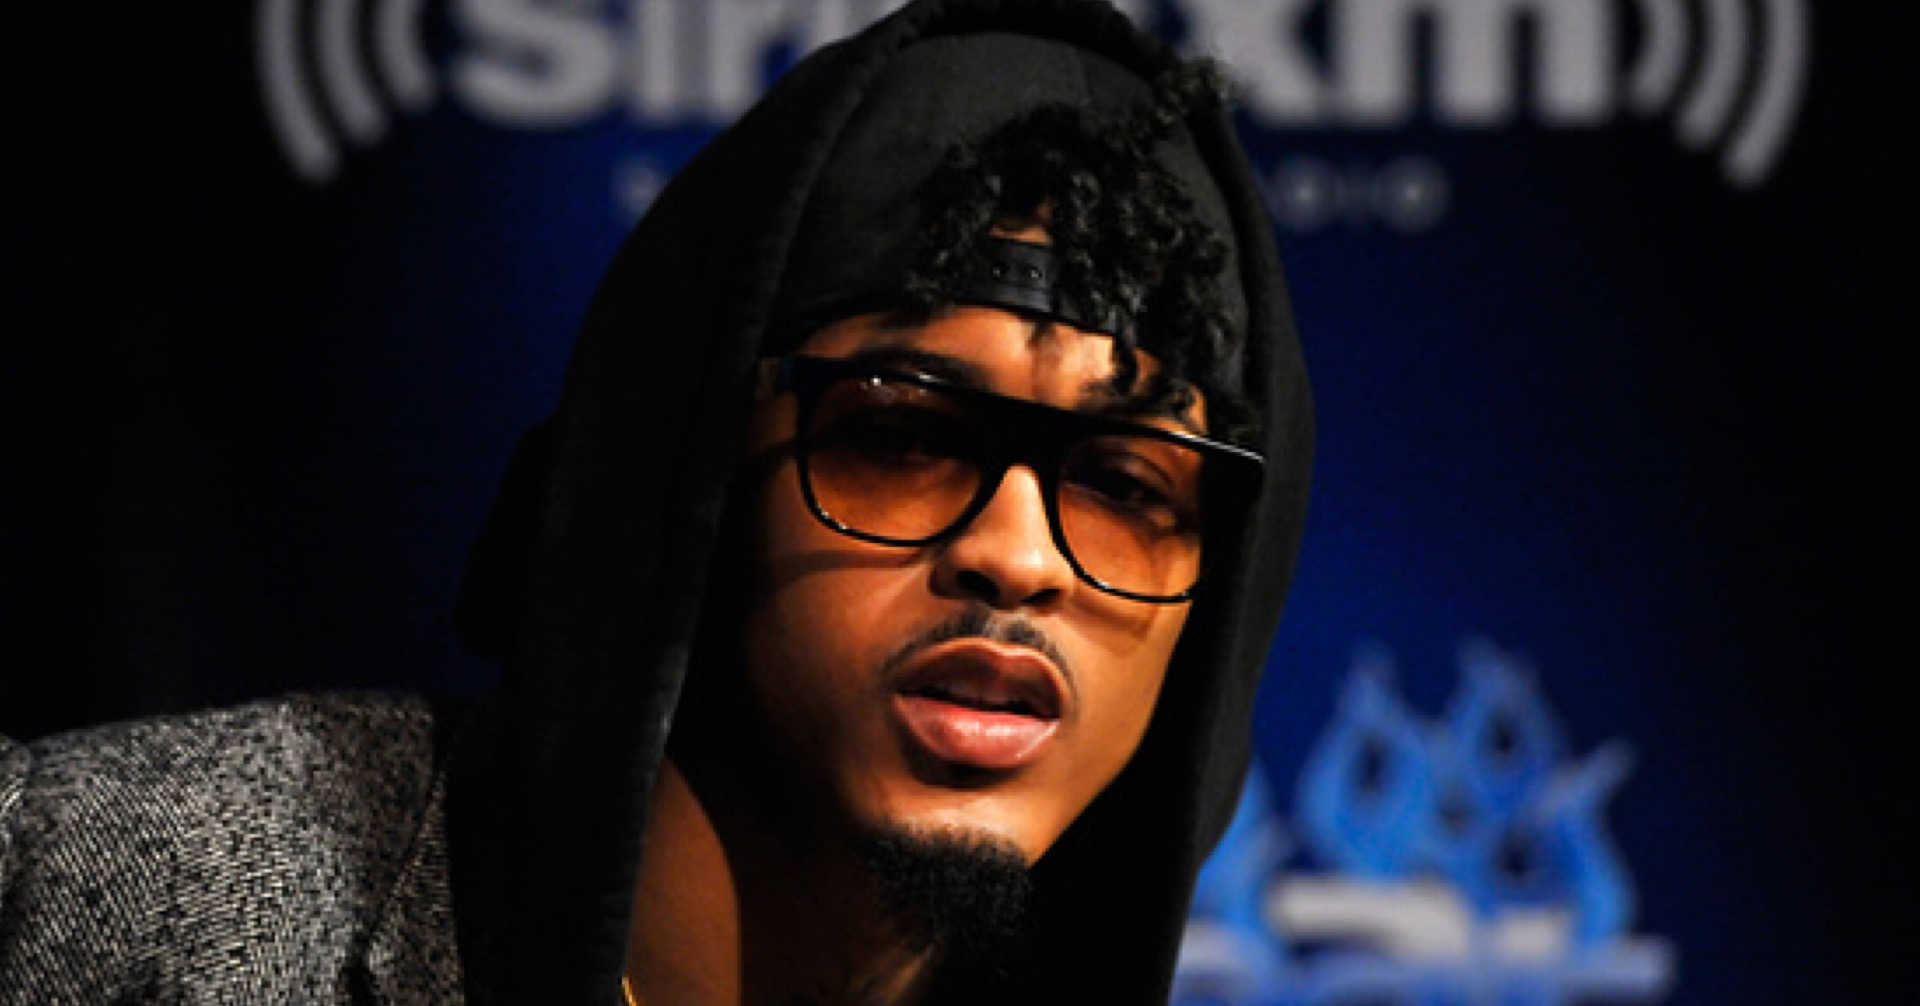 anibal montanez recommends August Alsina Shower Pic